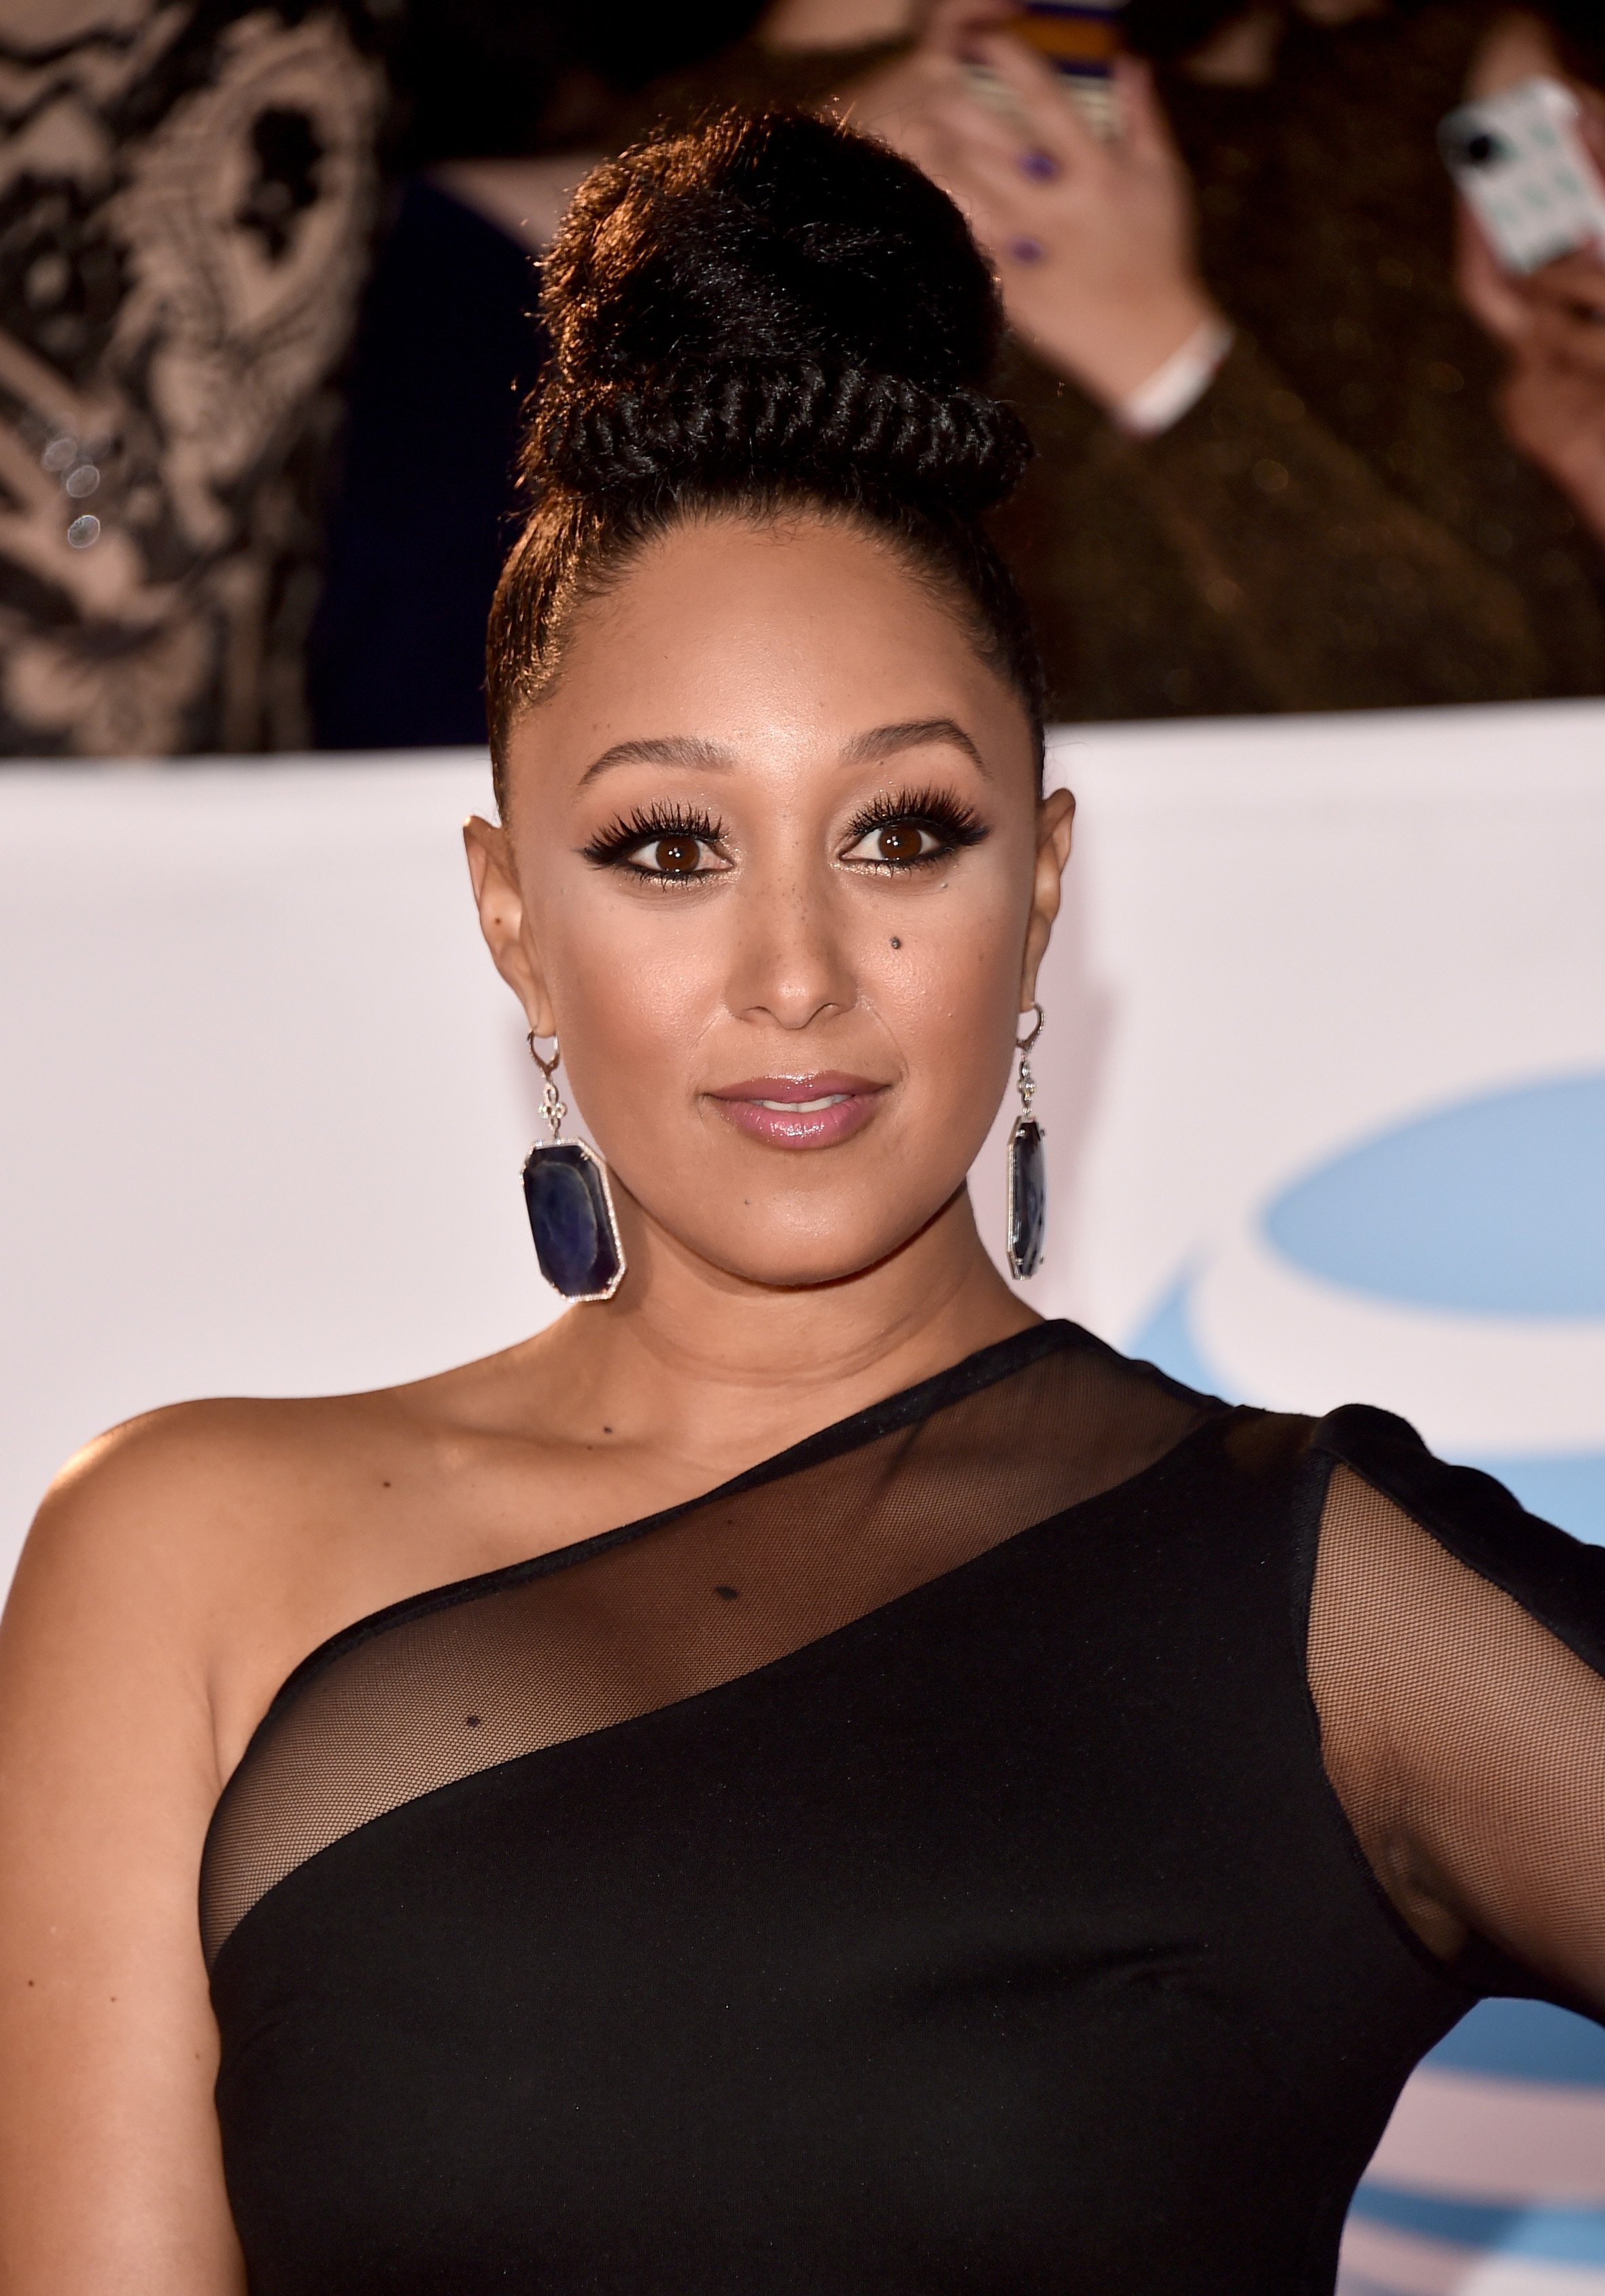 Tamera Mowry at the 49th NAACP Image Awards red carpet in January 2018. | Photo: Getty Images